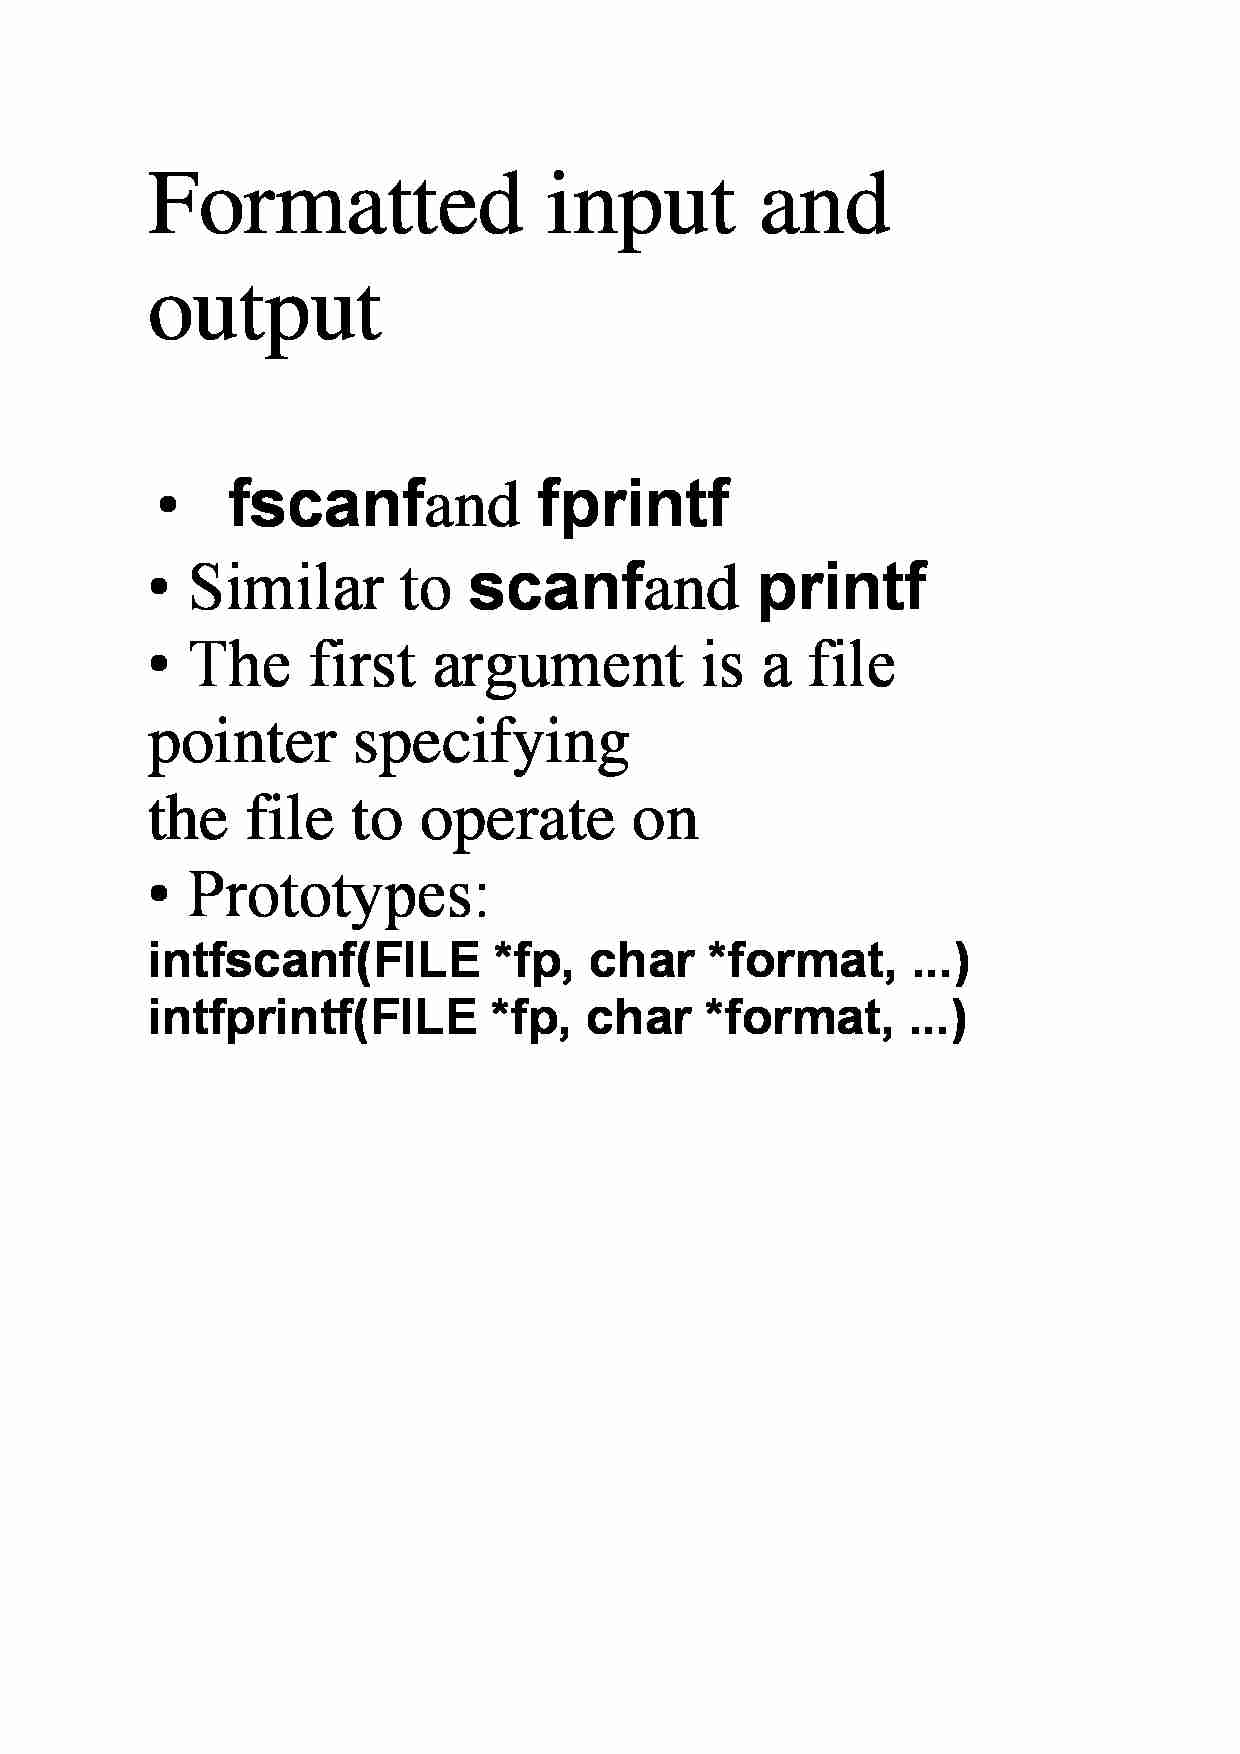 Formatted input and output - strona 1